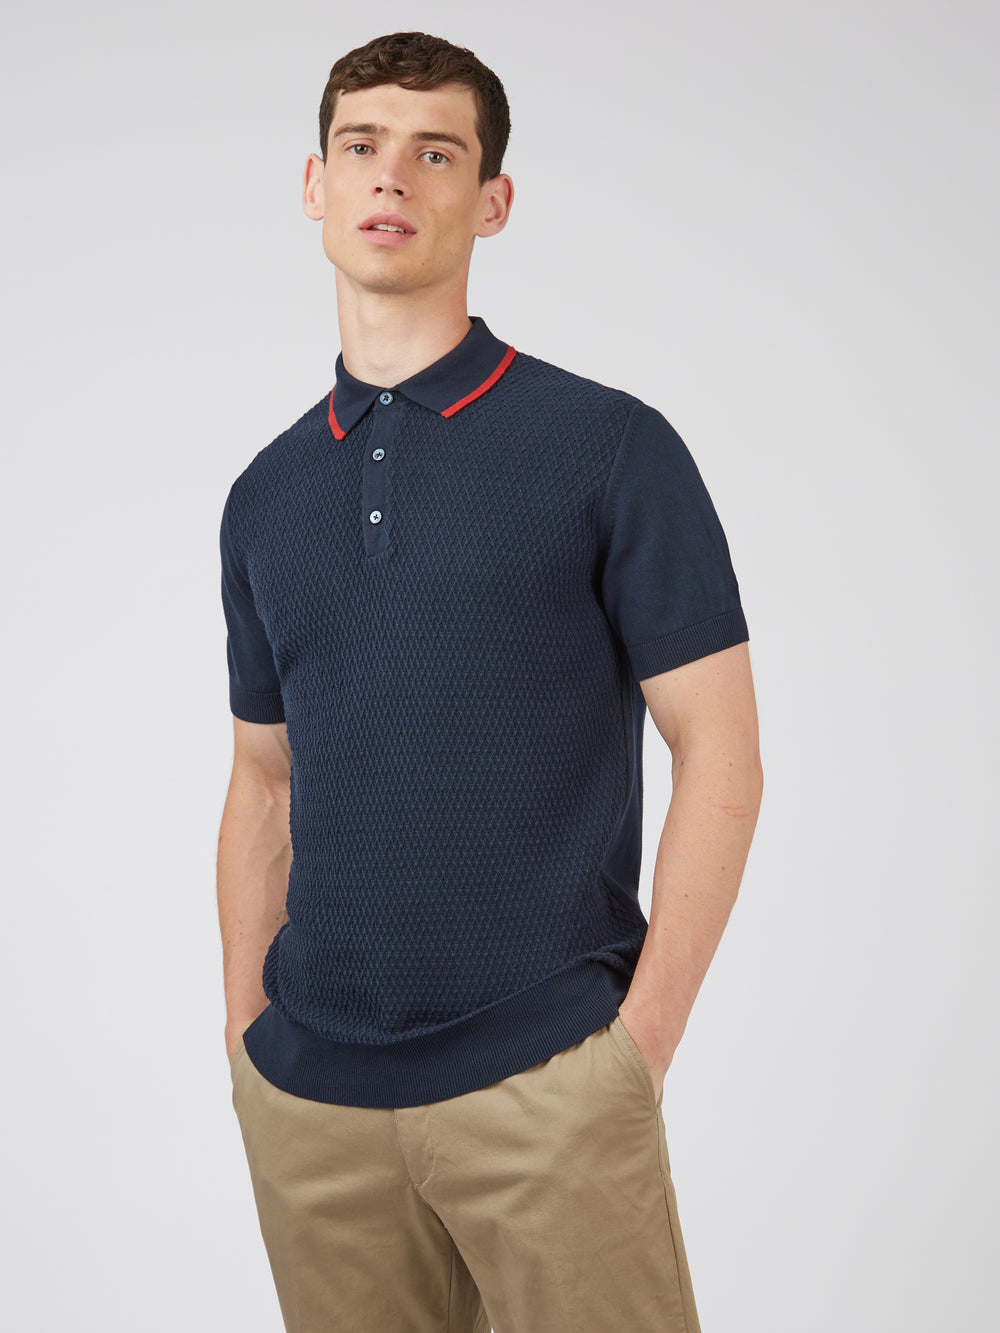 Textured Knit Contrast Tip Polo - Navy - Ben Sherman